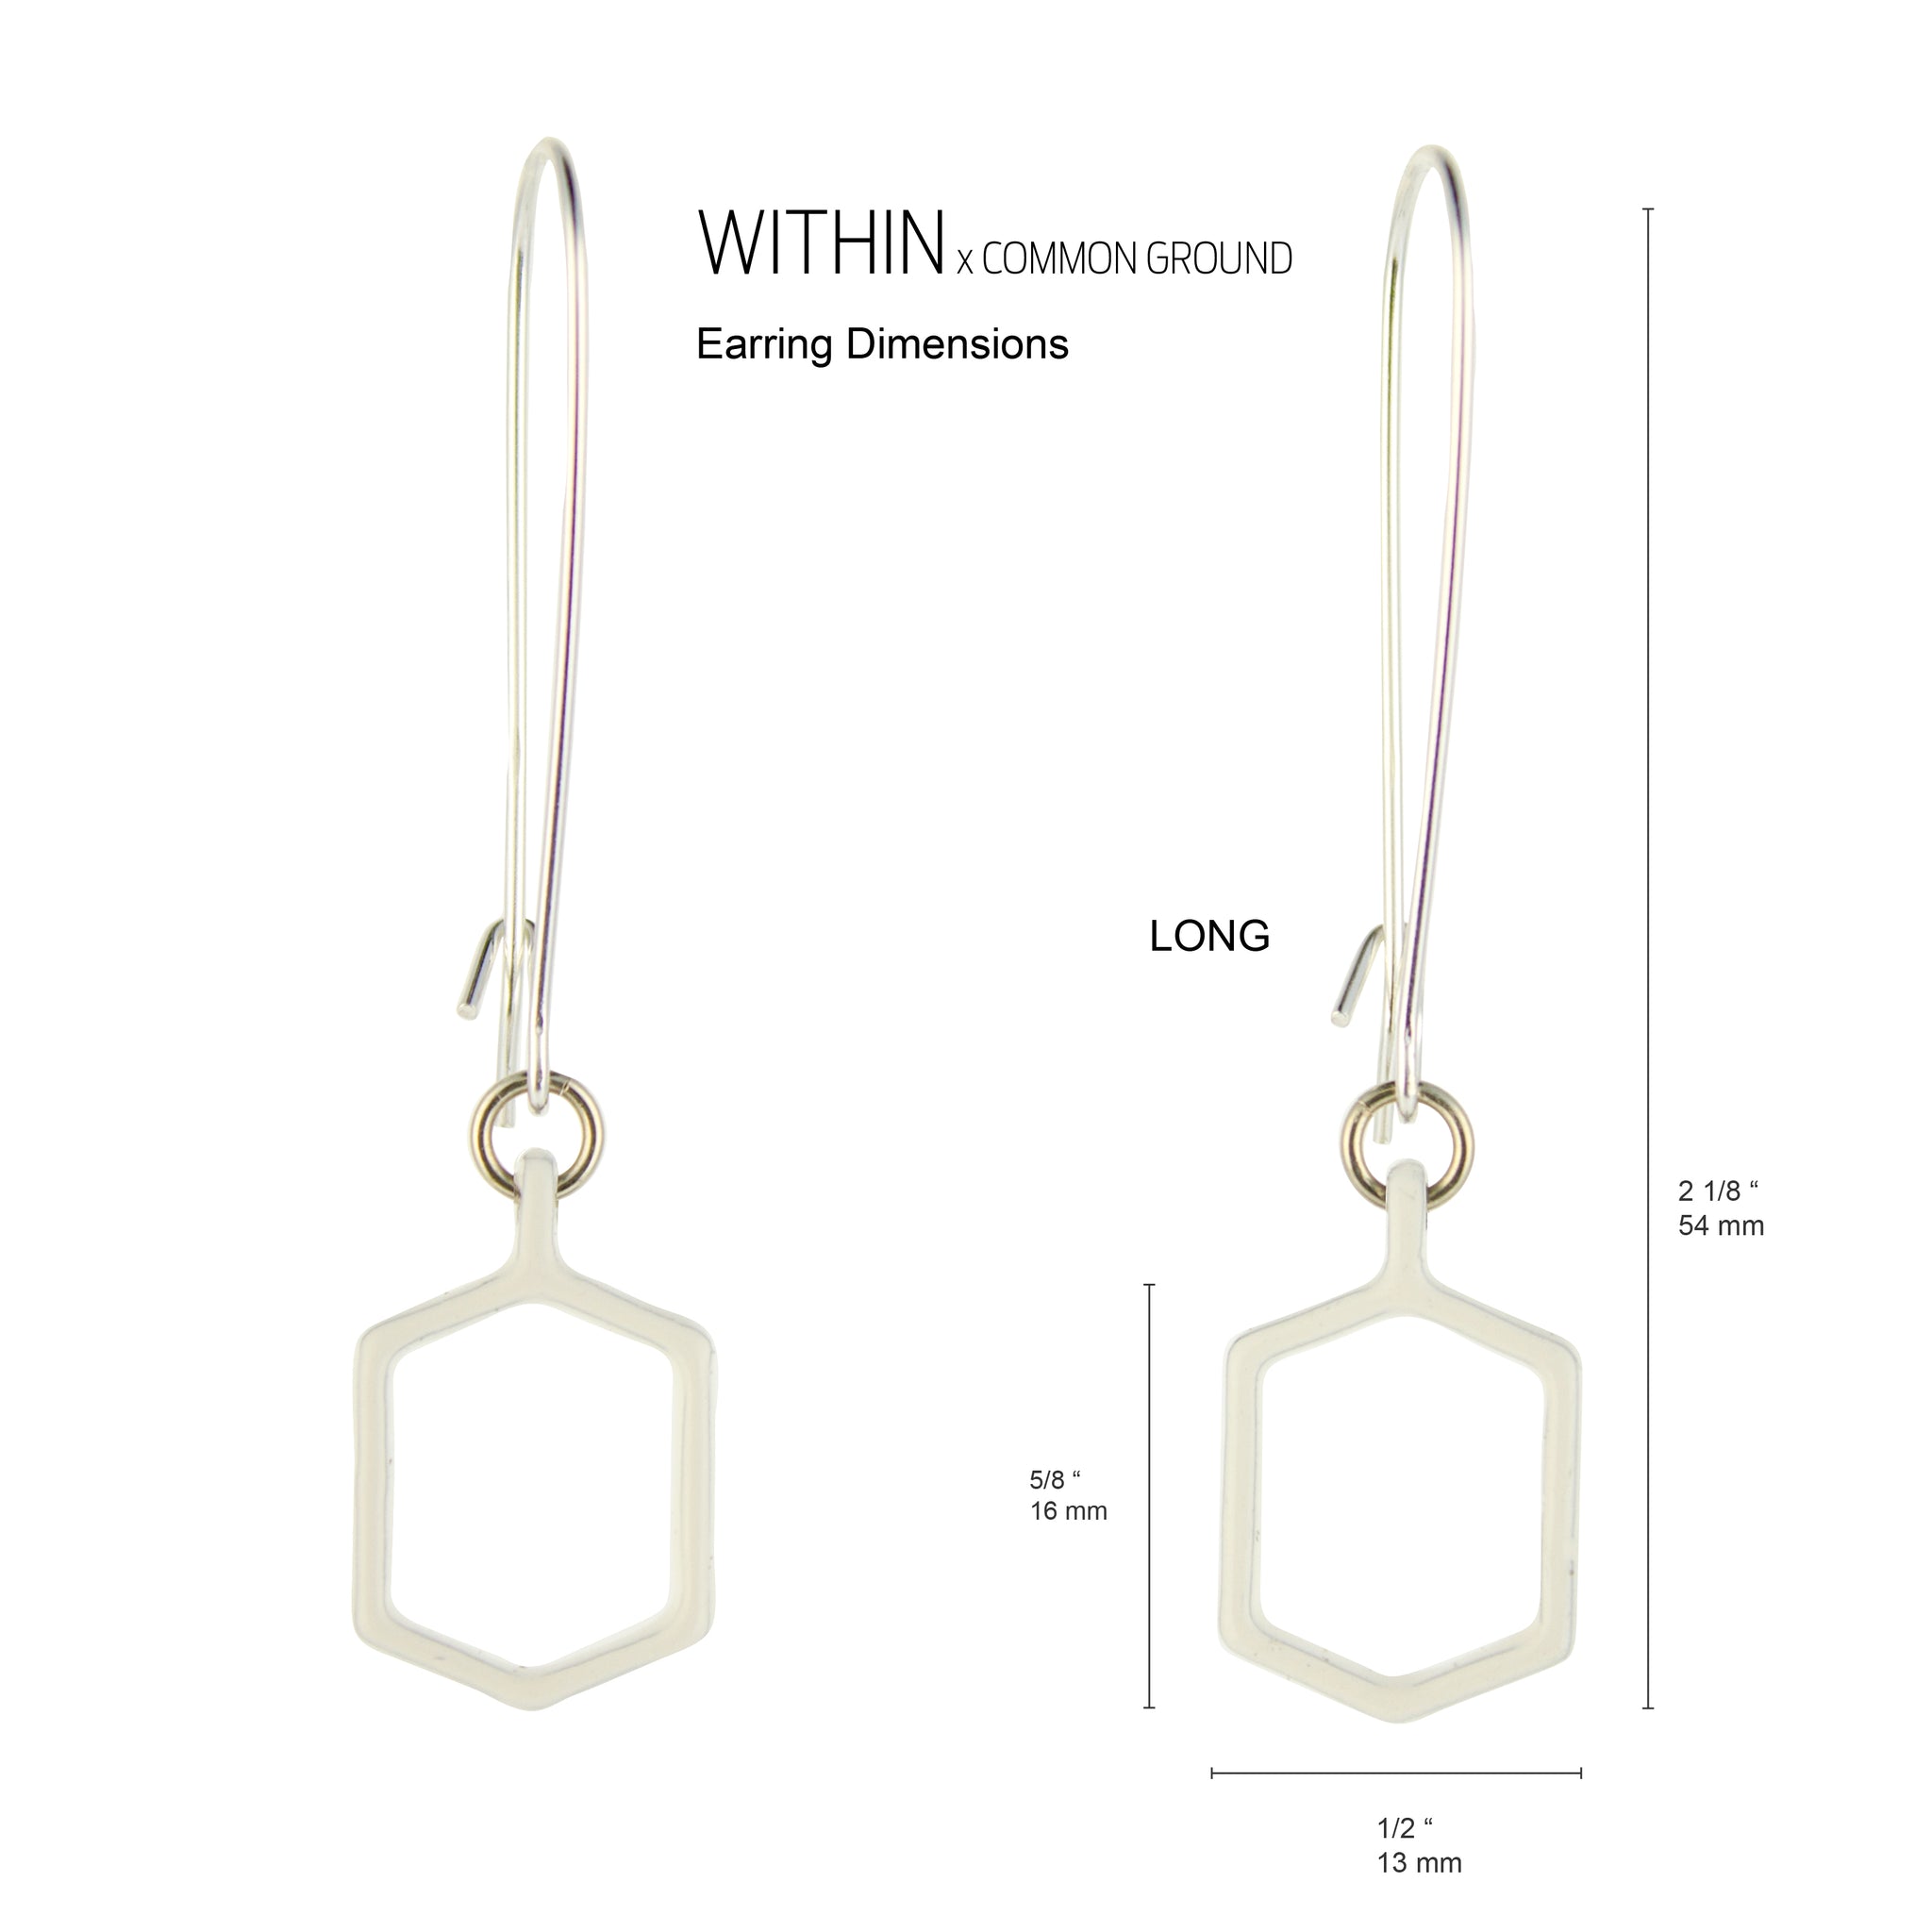 Bright_White - WITHIN x COMMON GROUND Earring Flat View